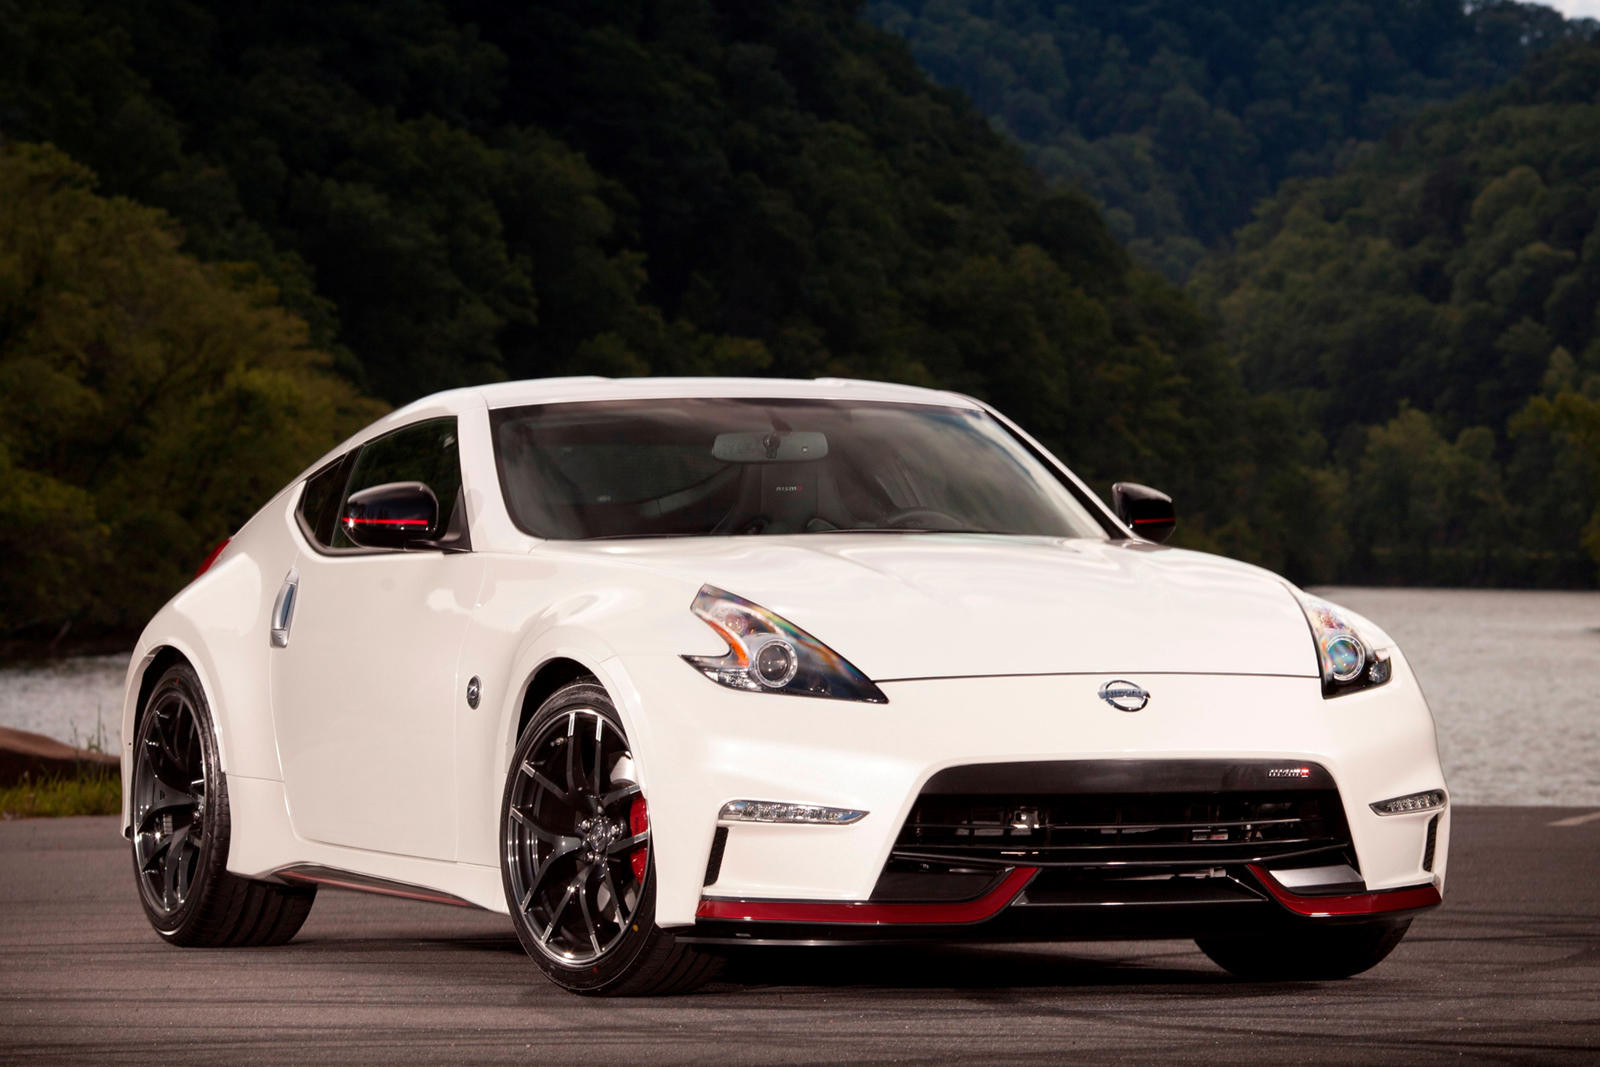 2020 Nissan 370Z Nismo Review, Pricing | 370Z Nismo Coupe Models with Nissan 370Z Nismo Price